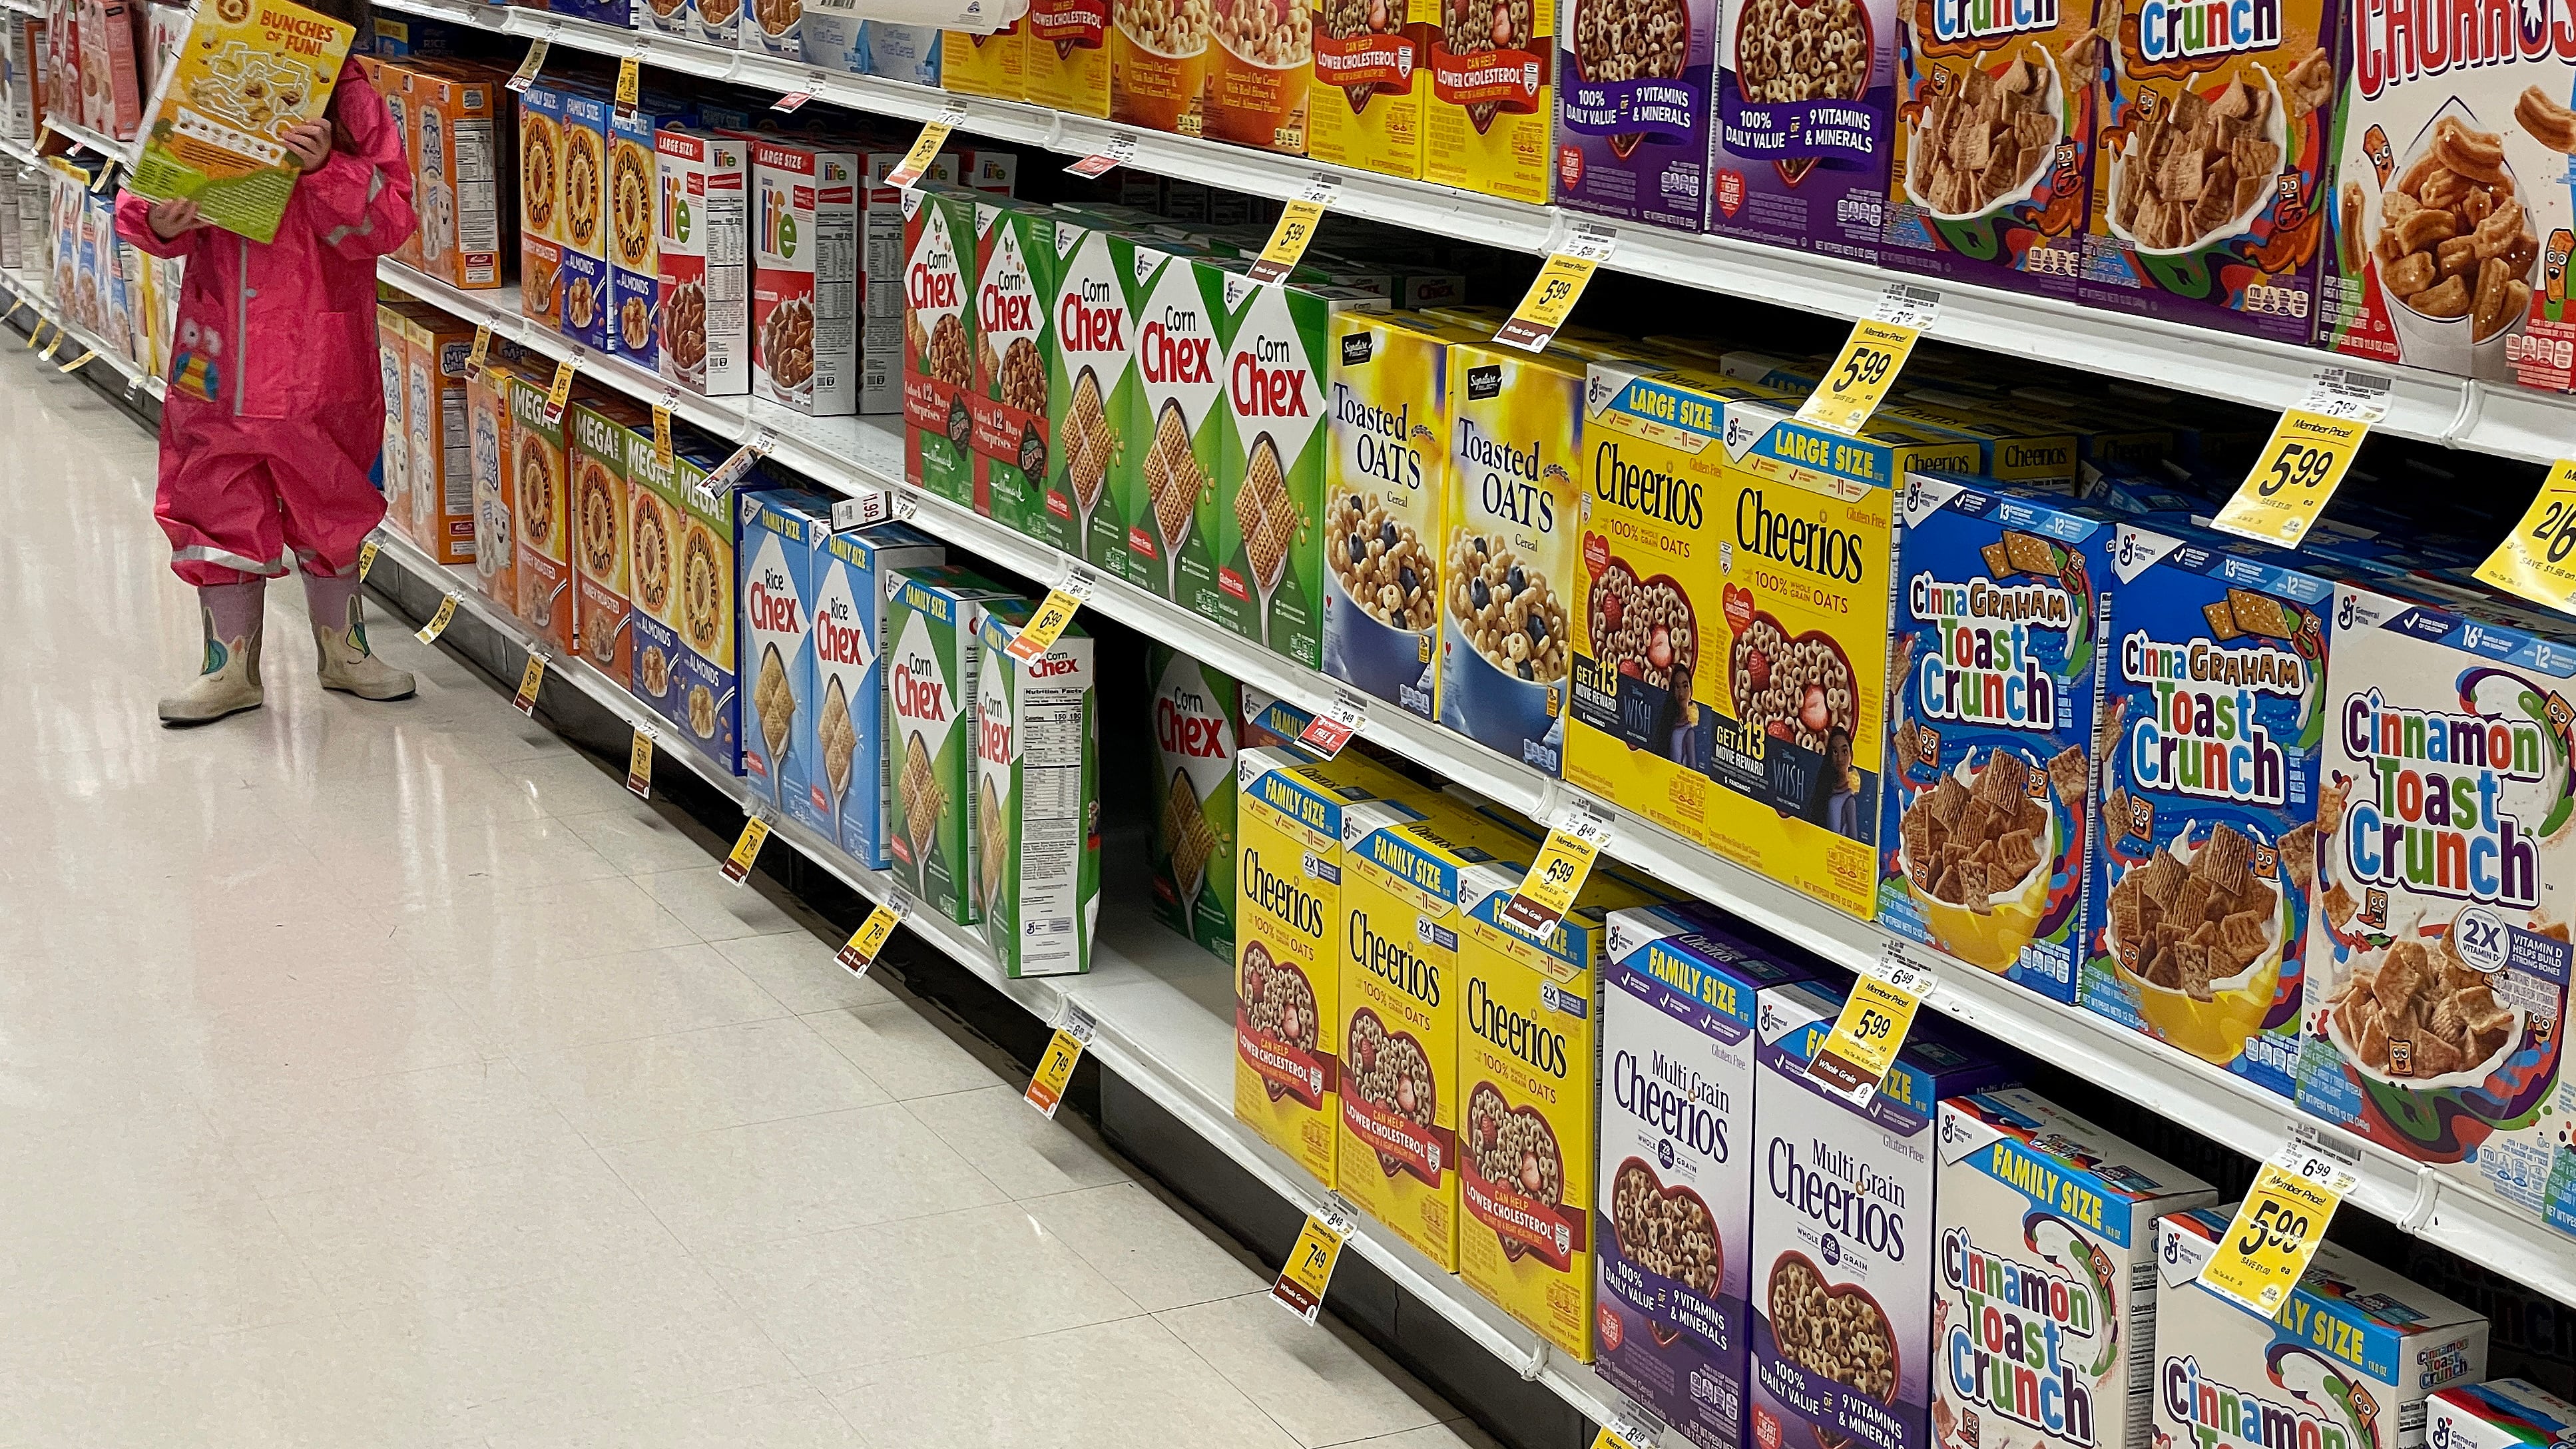 A young child carries a large box of cereal covering their face while they stand next to an aisle full of cereal boxes.